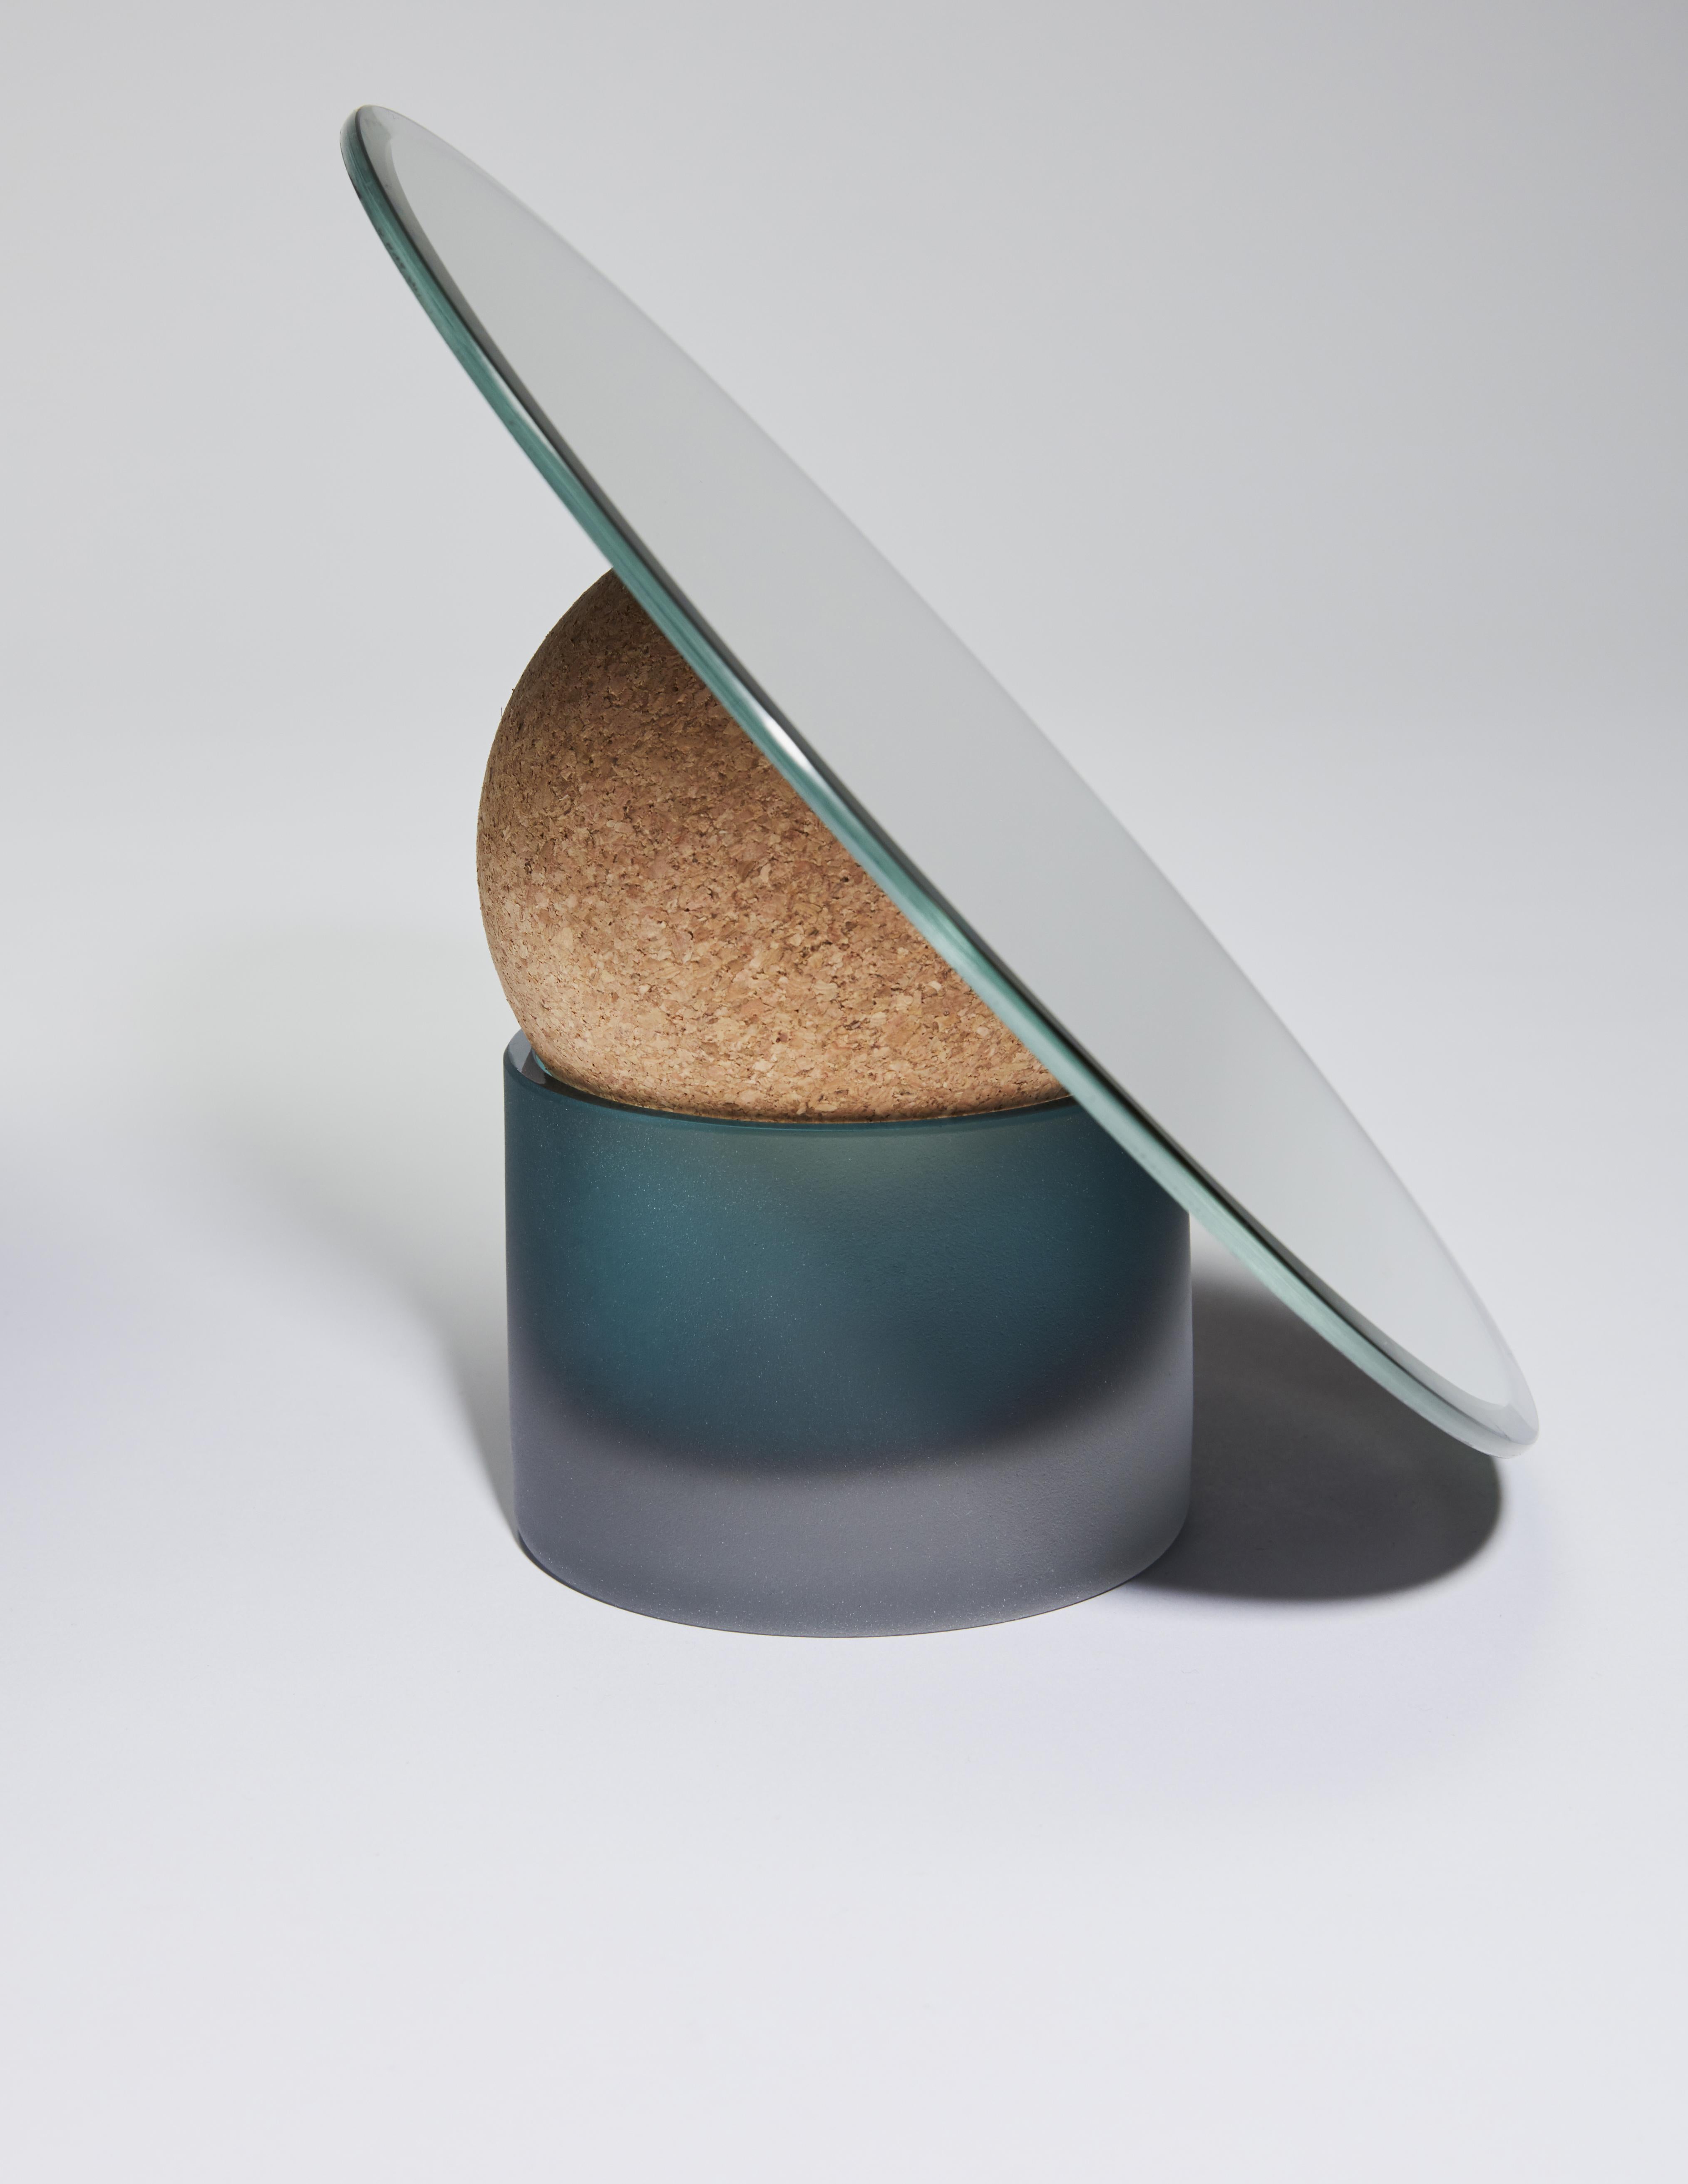 Astra table mirror-24 by Clemence Birot
Dimensions: Mirror Ø 24 x 20 cm
Materials: mirror, glass, cork. 

Clemence Birot started her career in Copenhagen, Denmark, and discovered a design practice closely related to craftsmanship. The latter